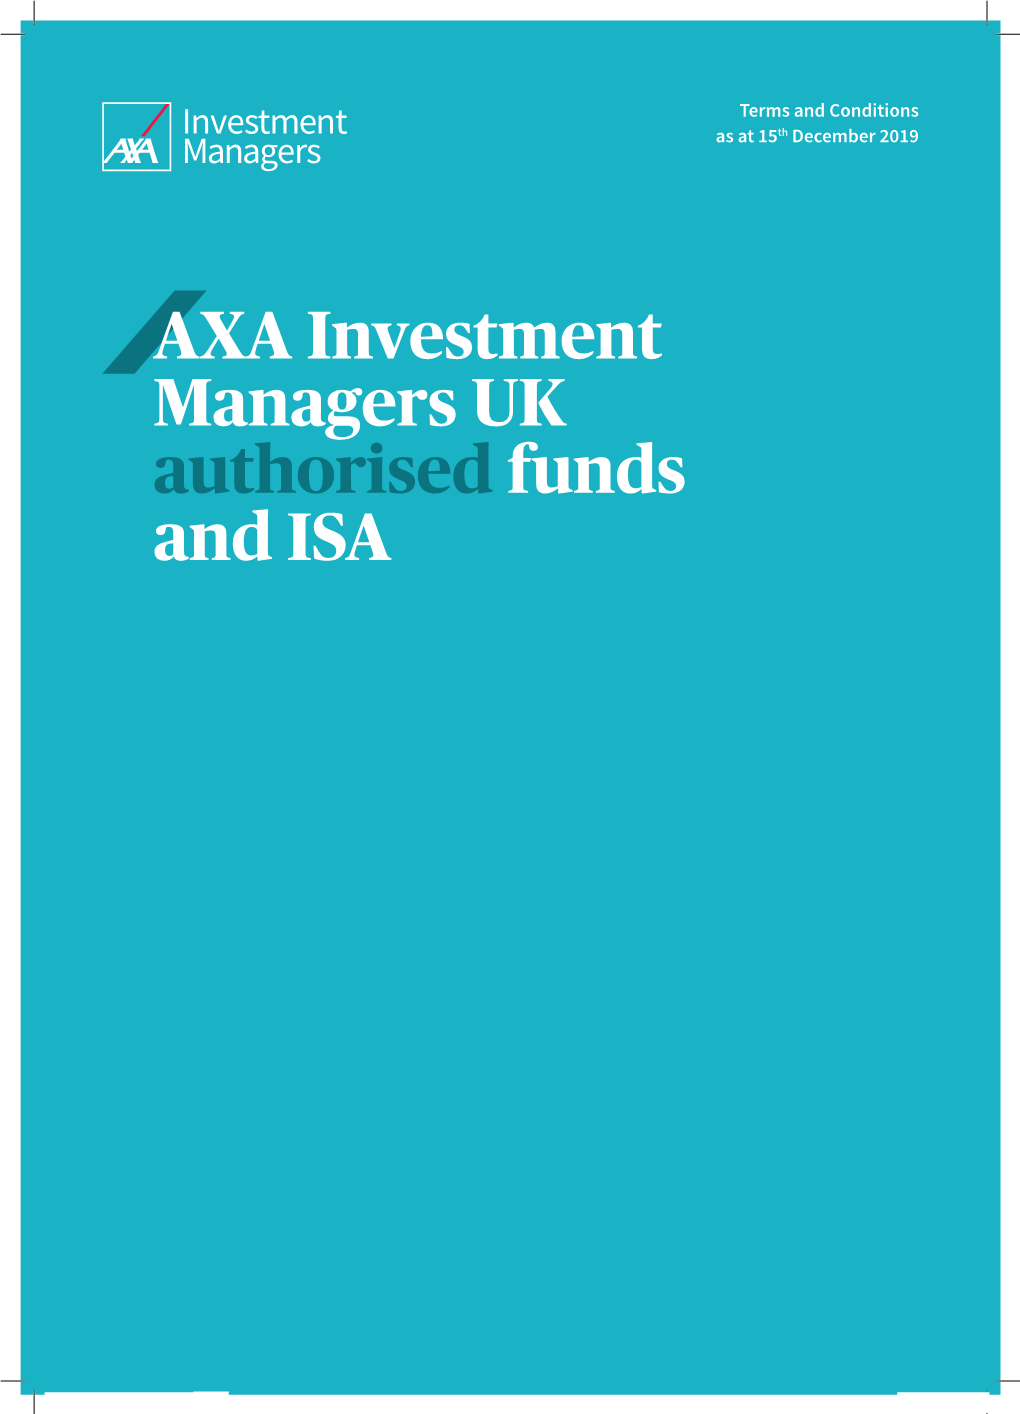 AXA Investment Managers UK Authorised Funds and ISA